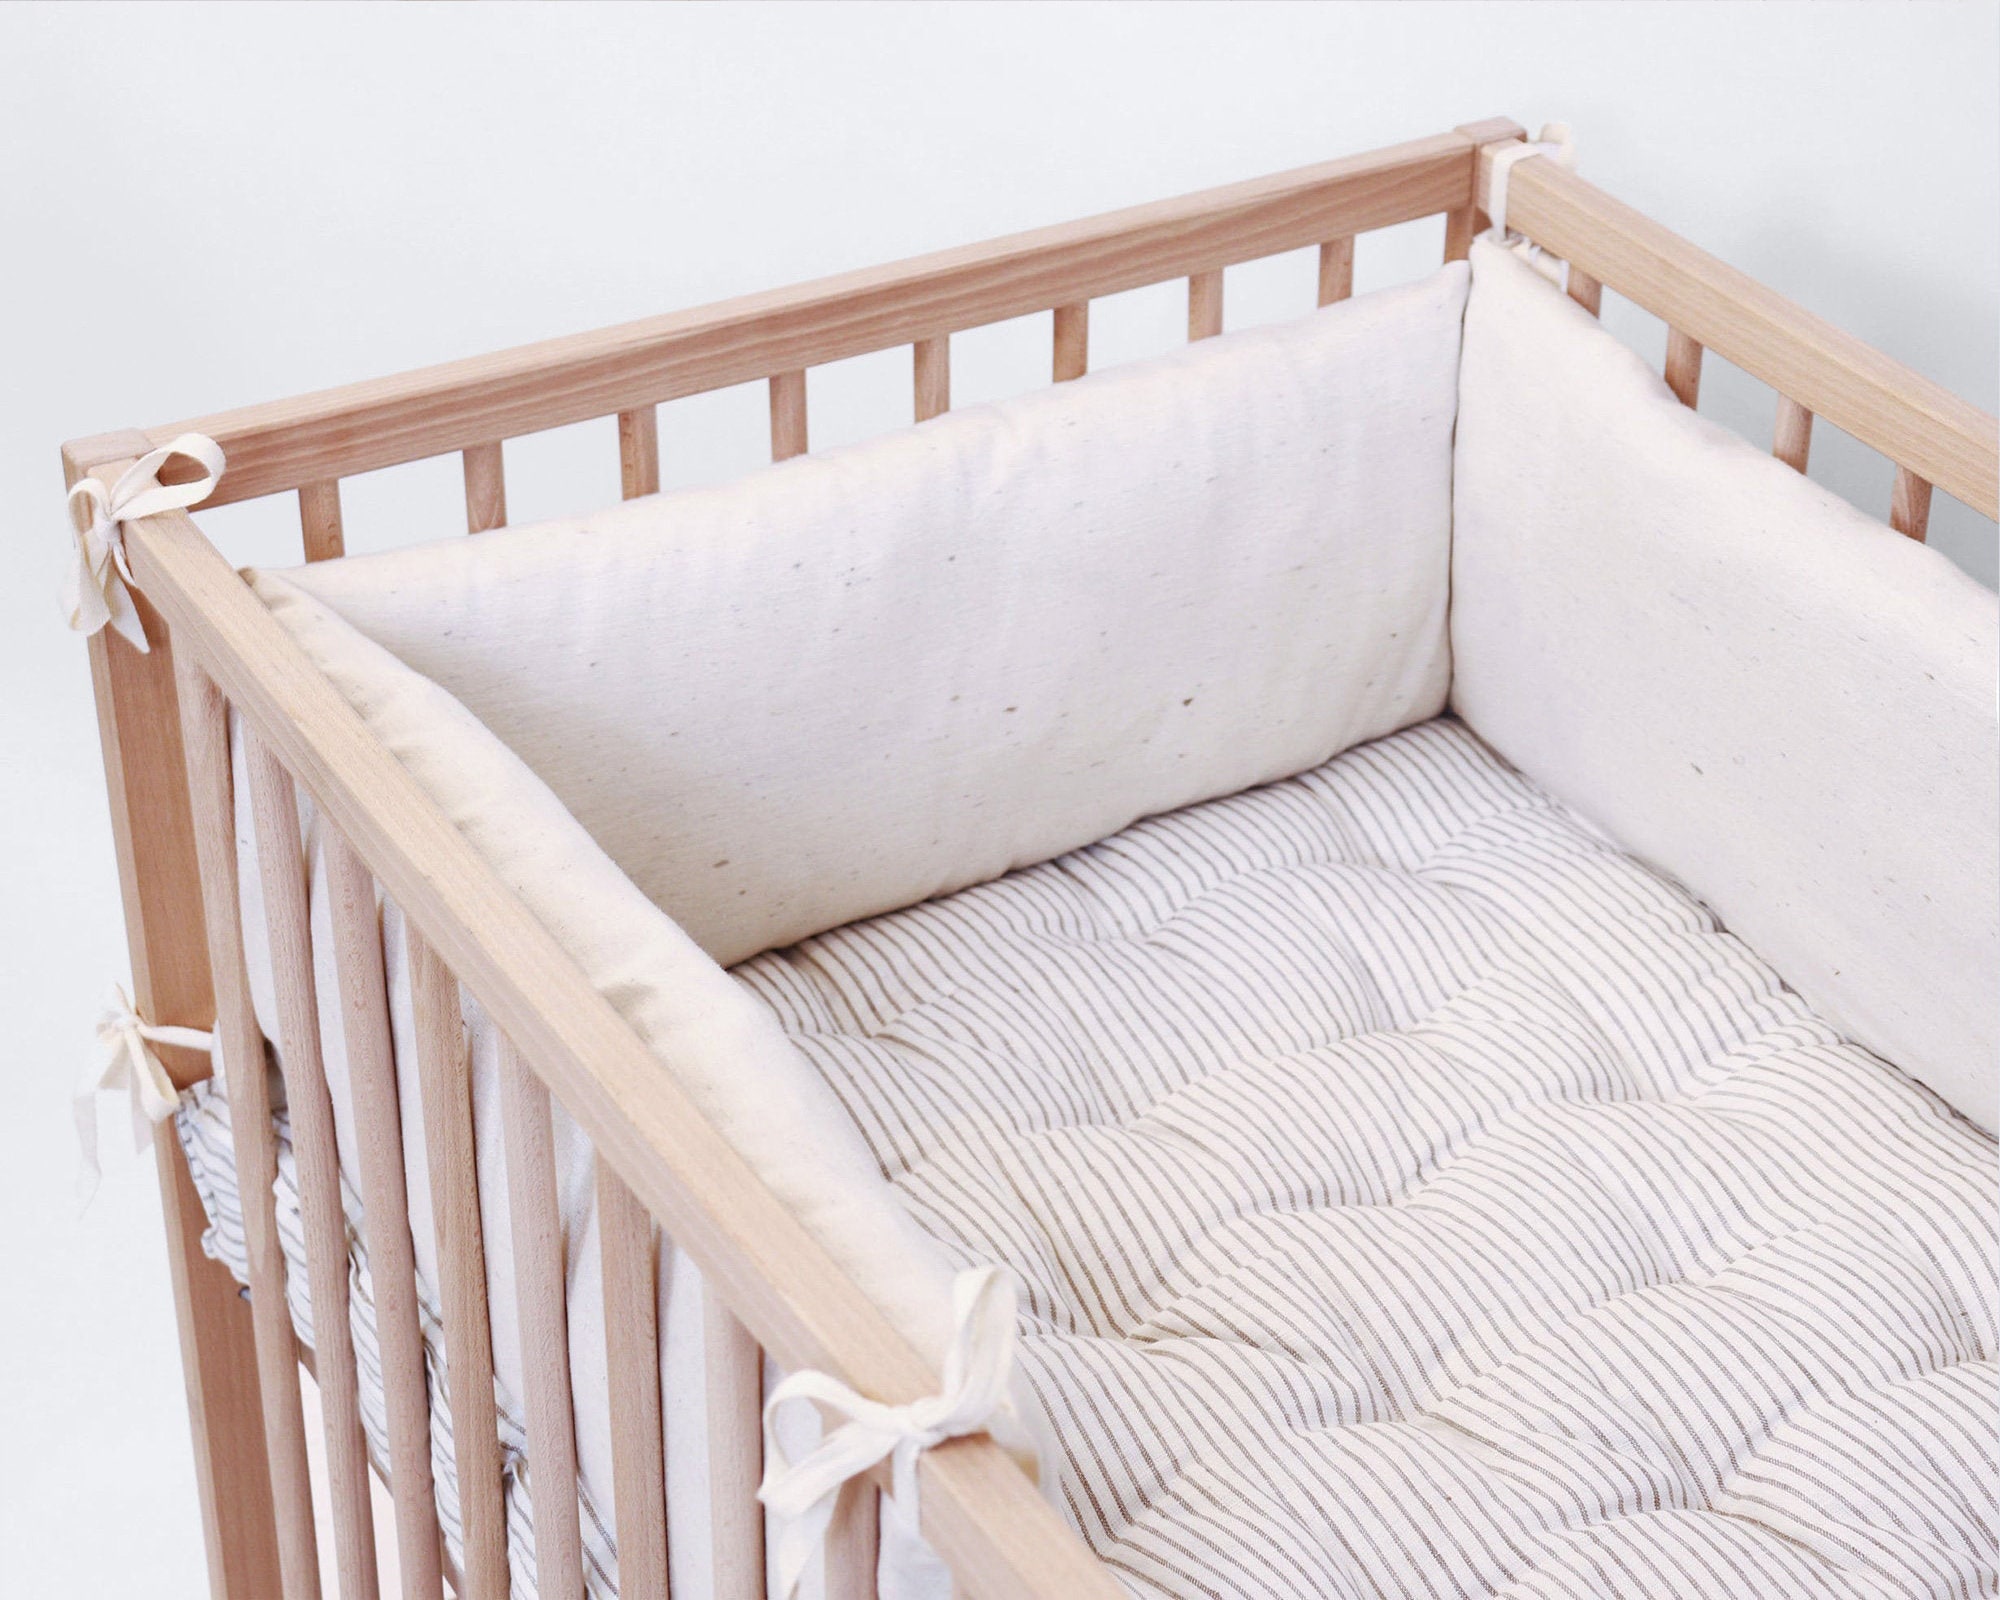 mattresses materials for infant beds